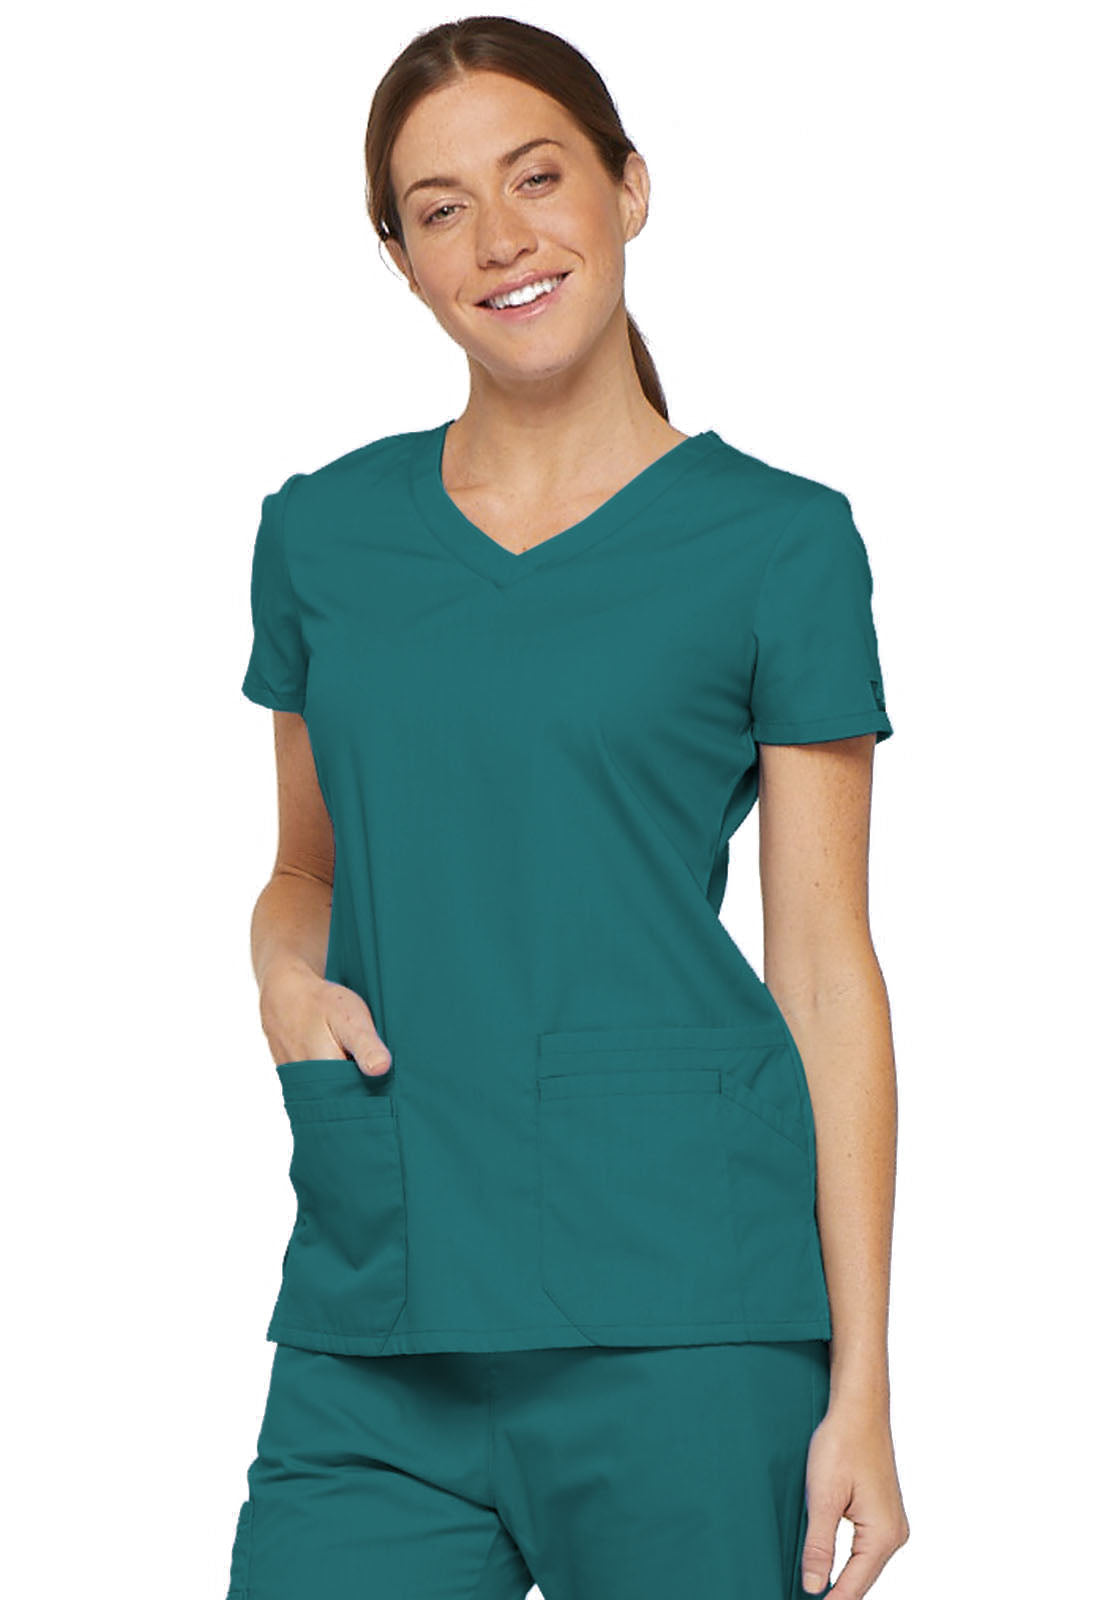 Exist. Conjunto Mujer Dickies EDS Signature Mod.85906/86206 Teal